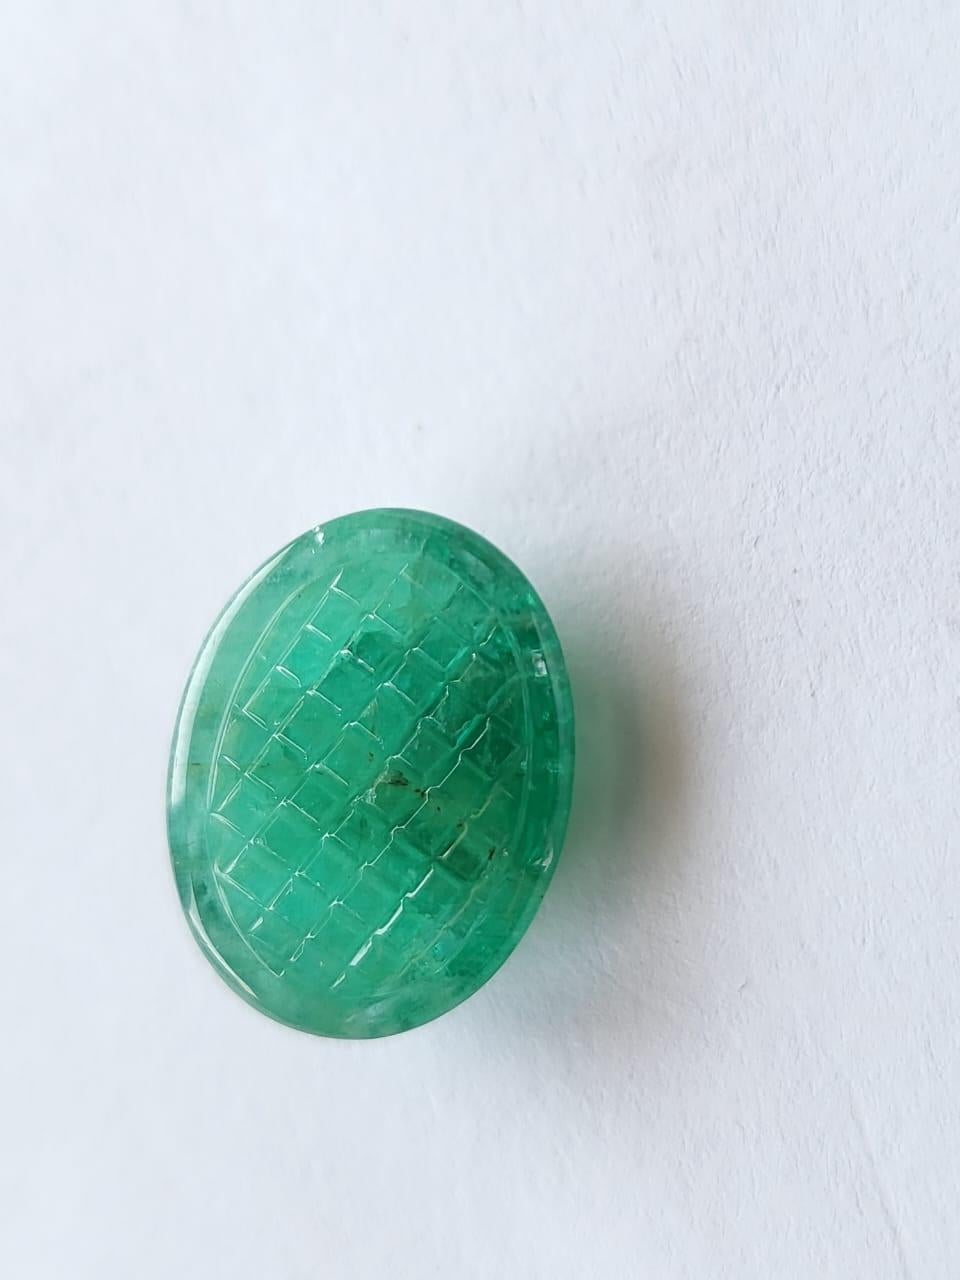 Art Deco 11.21 Carat Exclusive Natural Emerald Carving Oval Cut Loose Gemstone For Sale